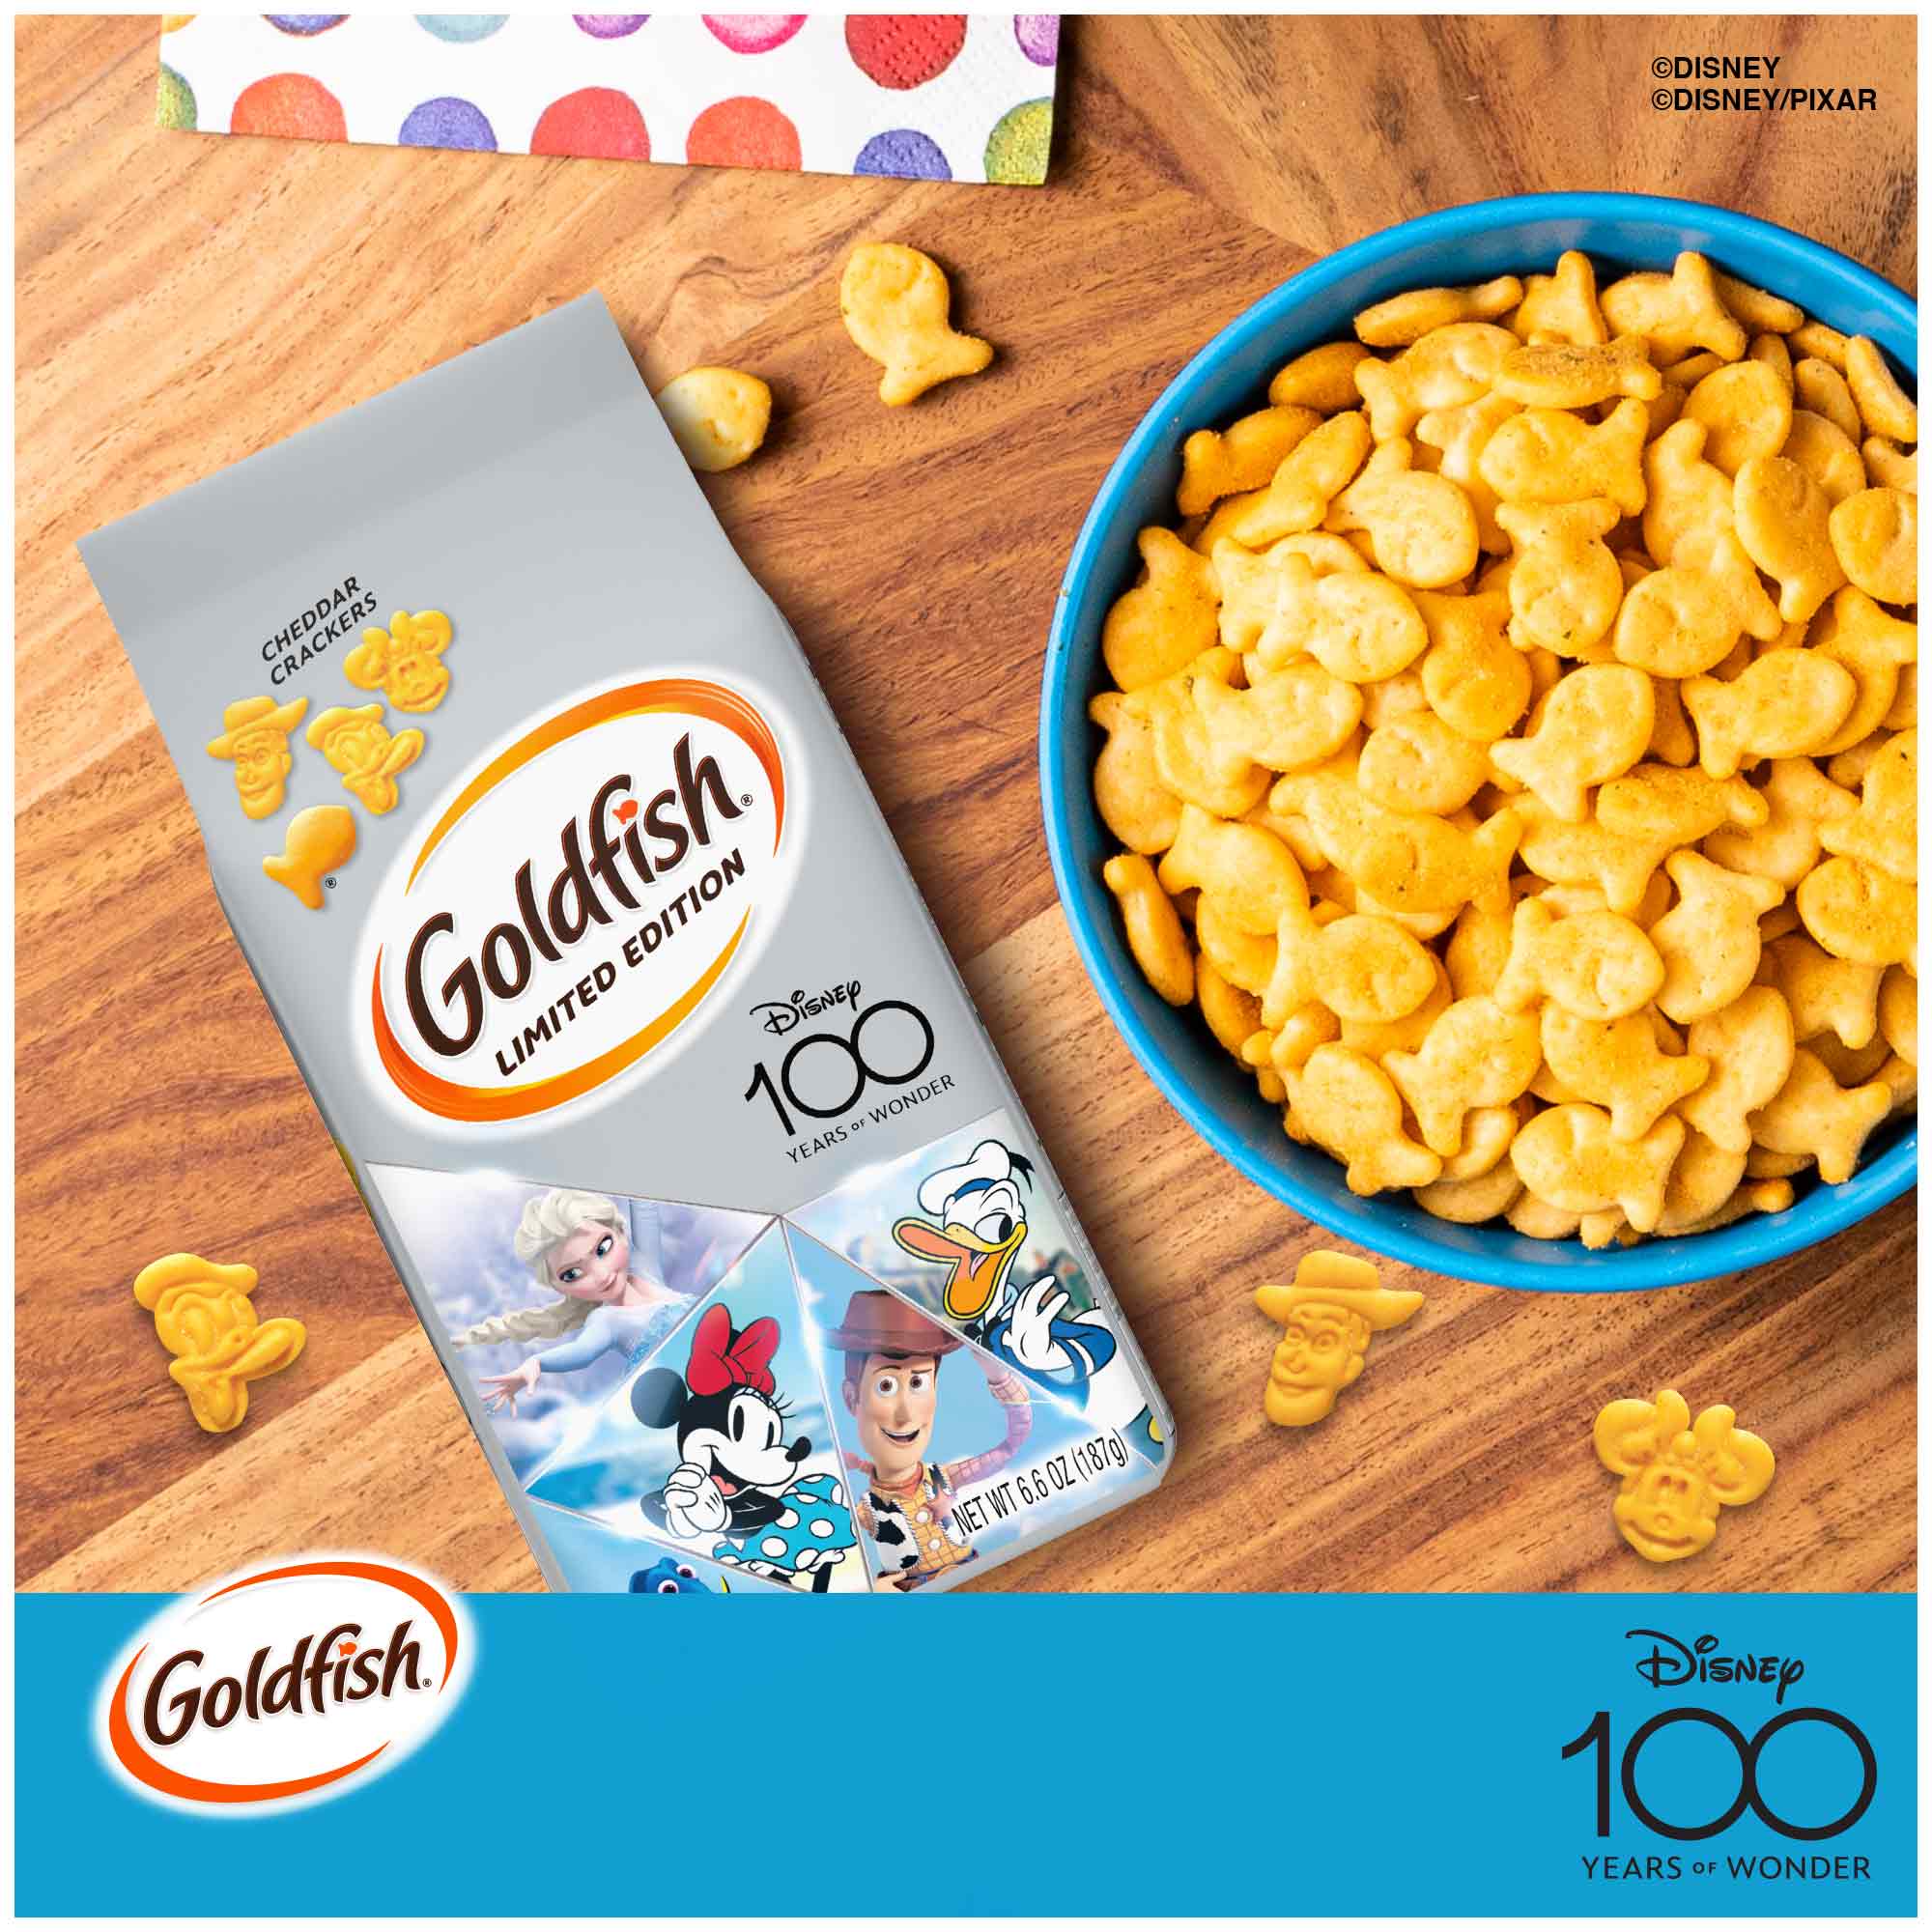 Goldfish Limited Edition Disney 100th Cheddar Crackers, Snack Crackers, 6.6 oz bag - image 3 of 10